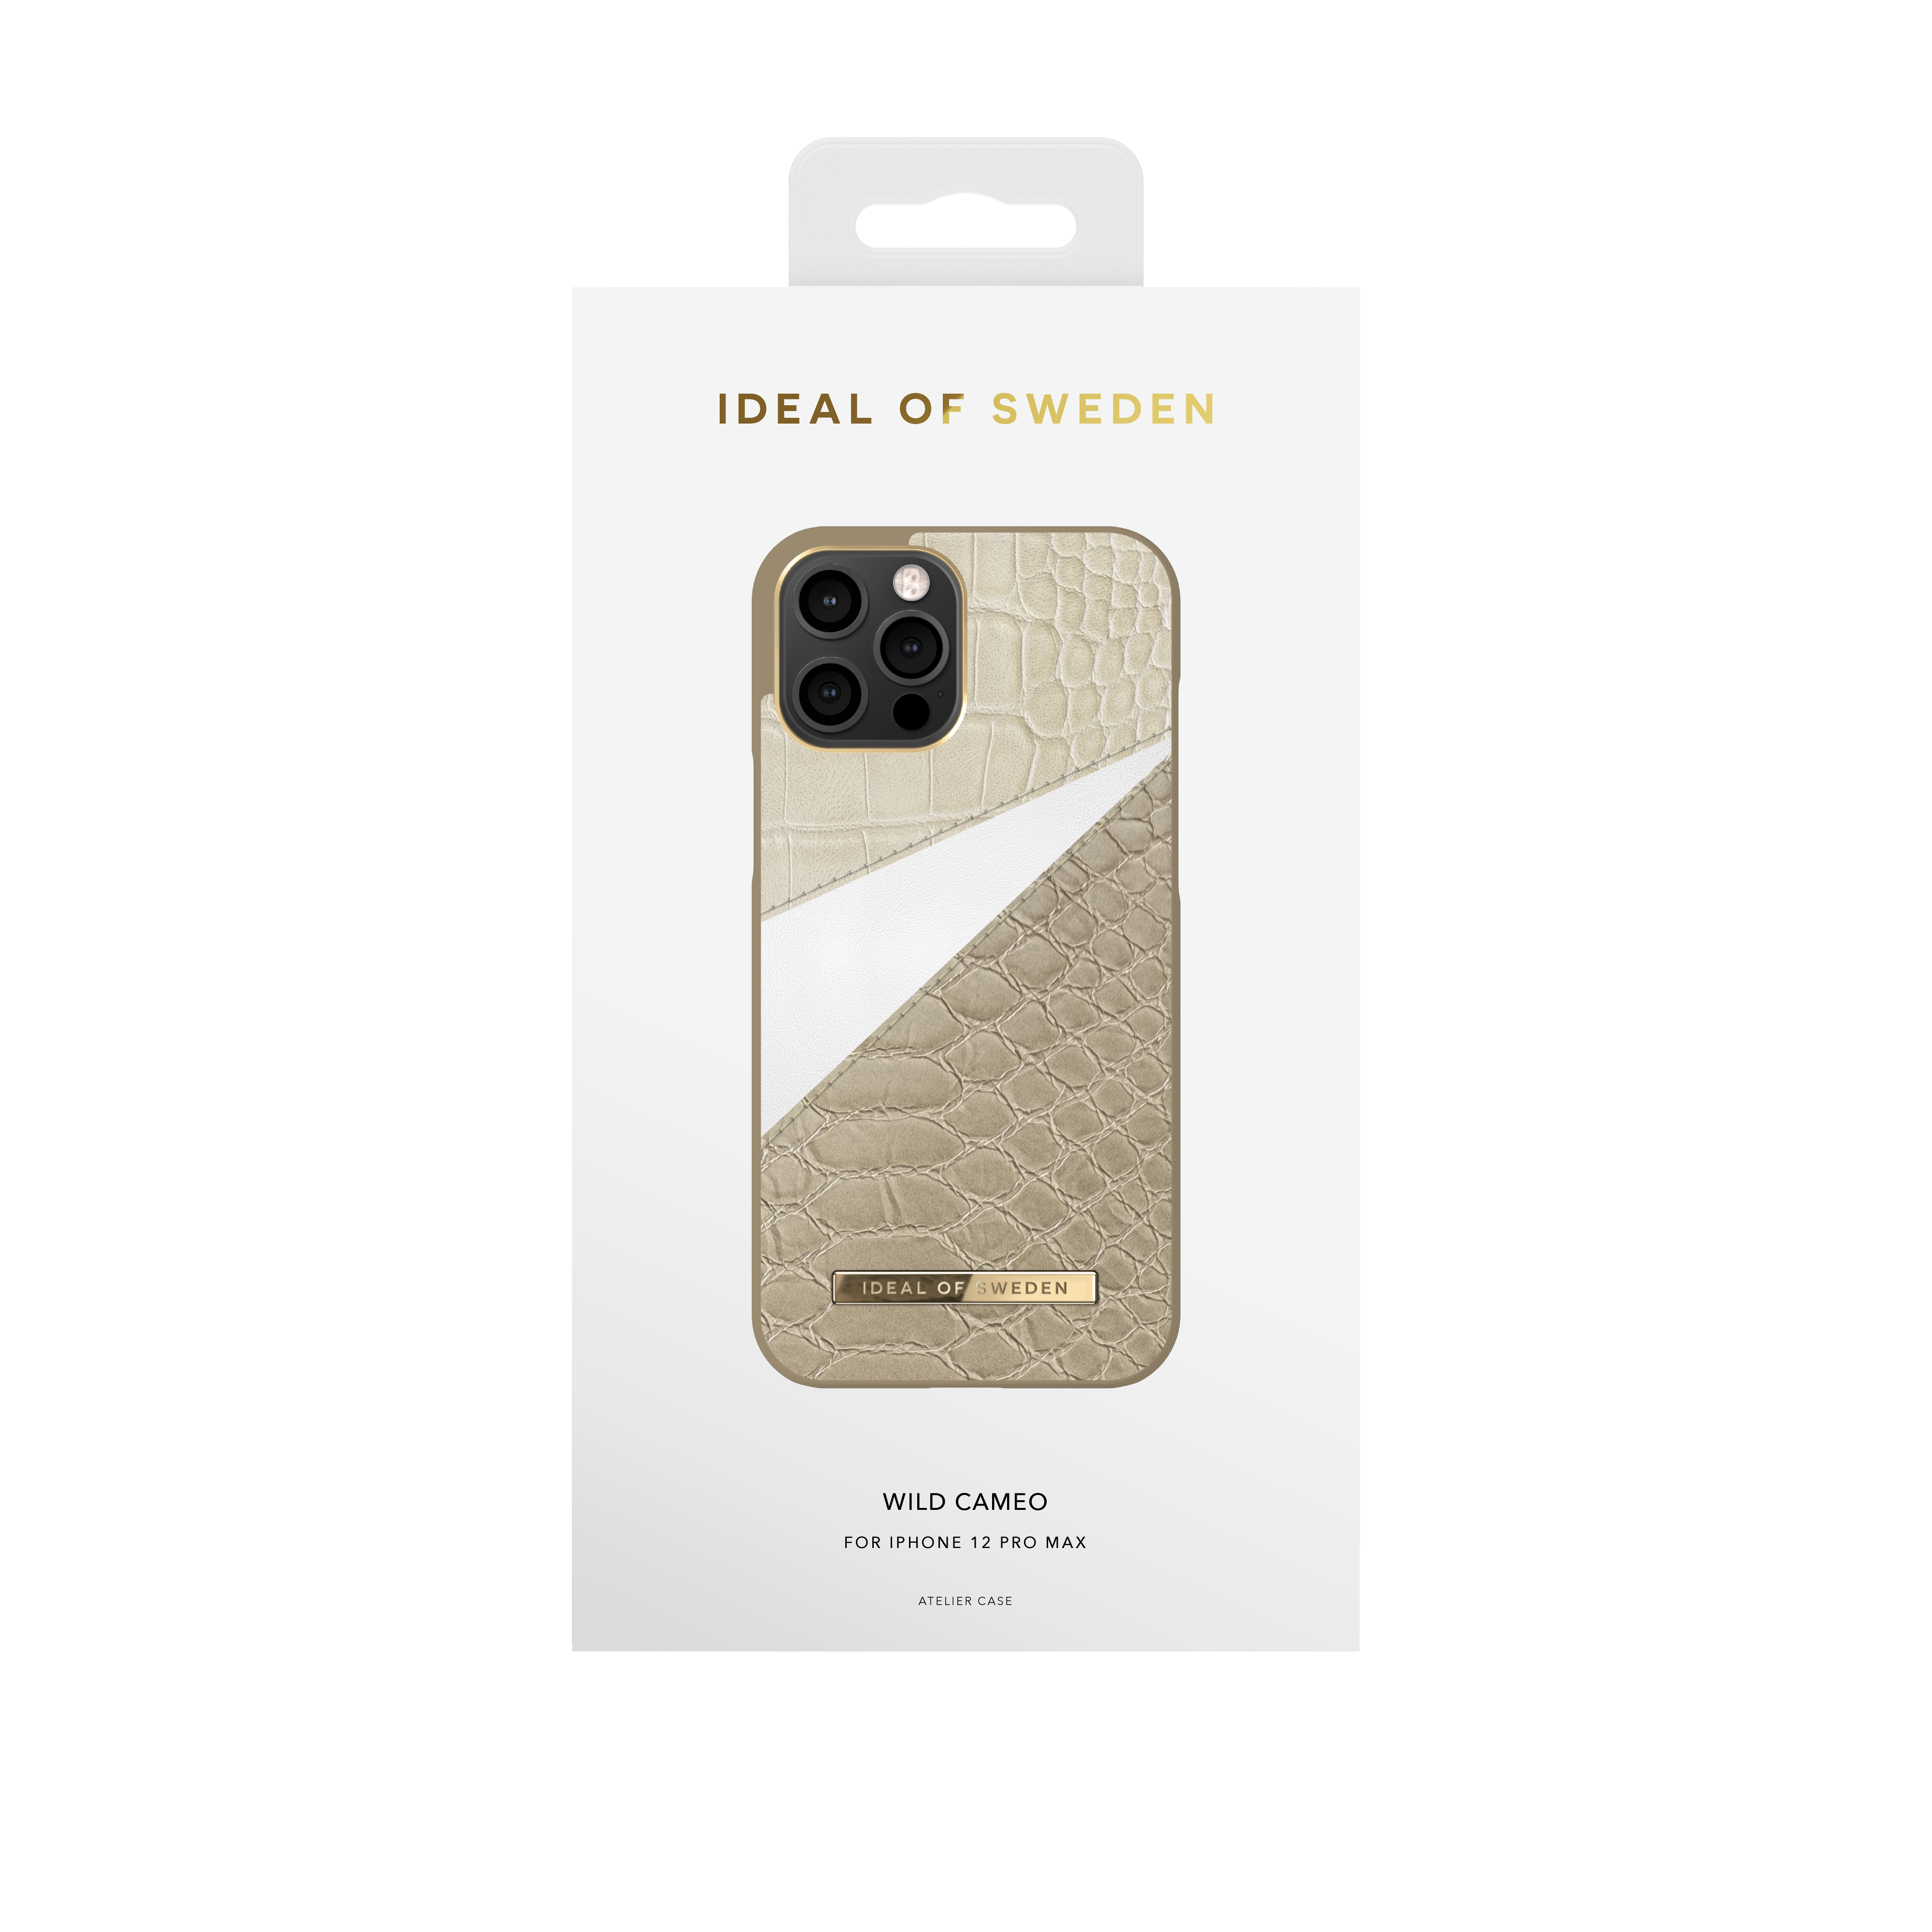 IDEAL OF Max, 12 SWEDEN Apple, Cameo IPhone Wild IDACAW20-2067-246, Backcover, Pro